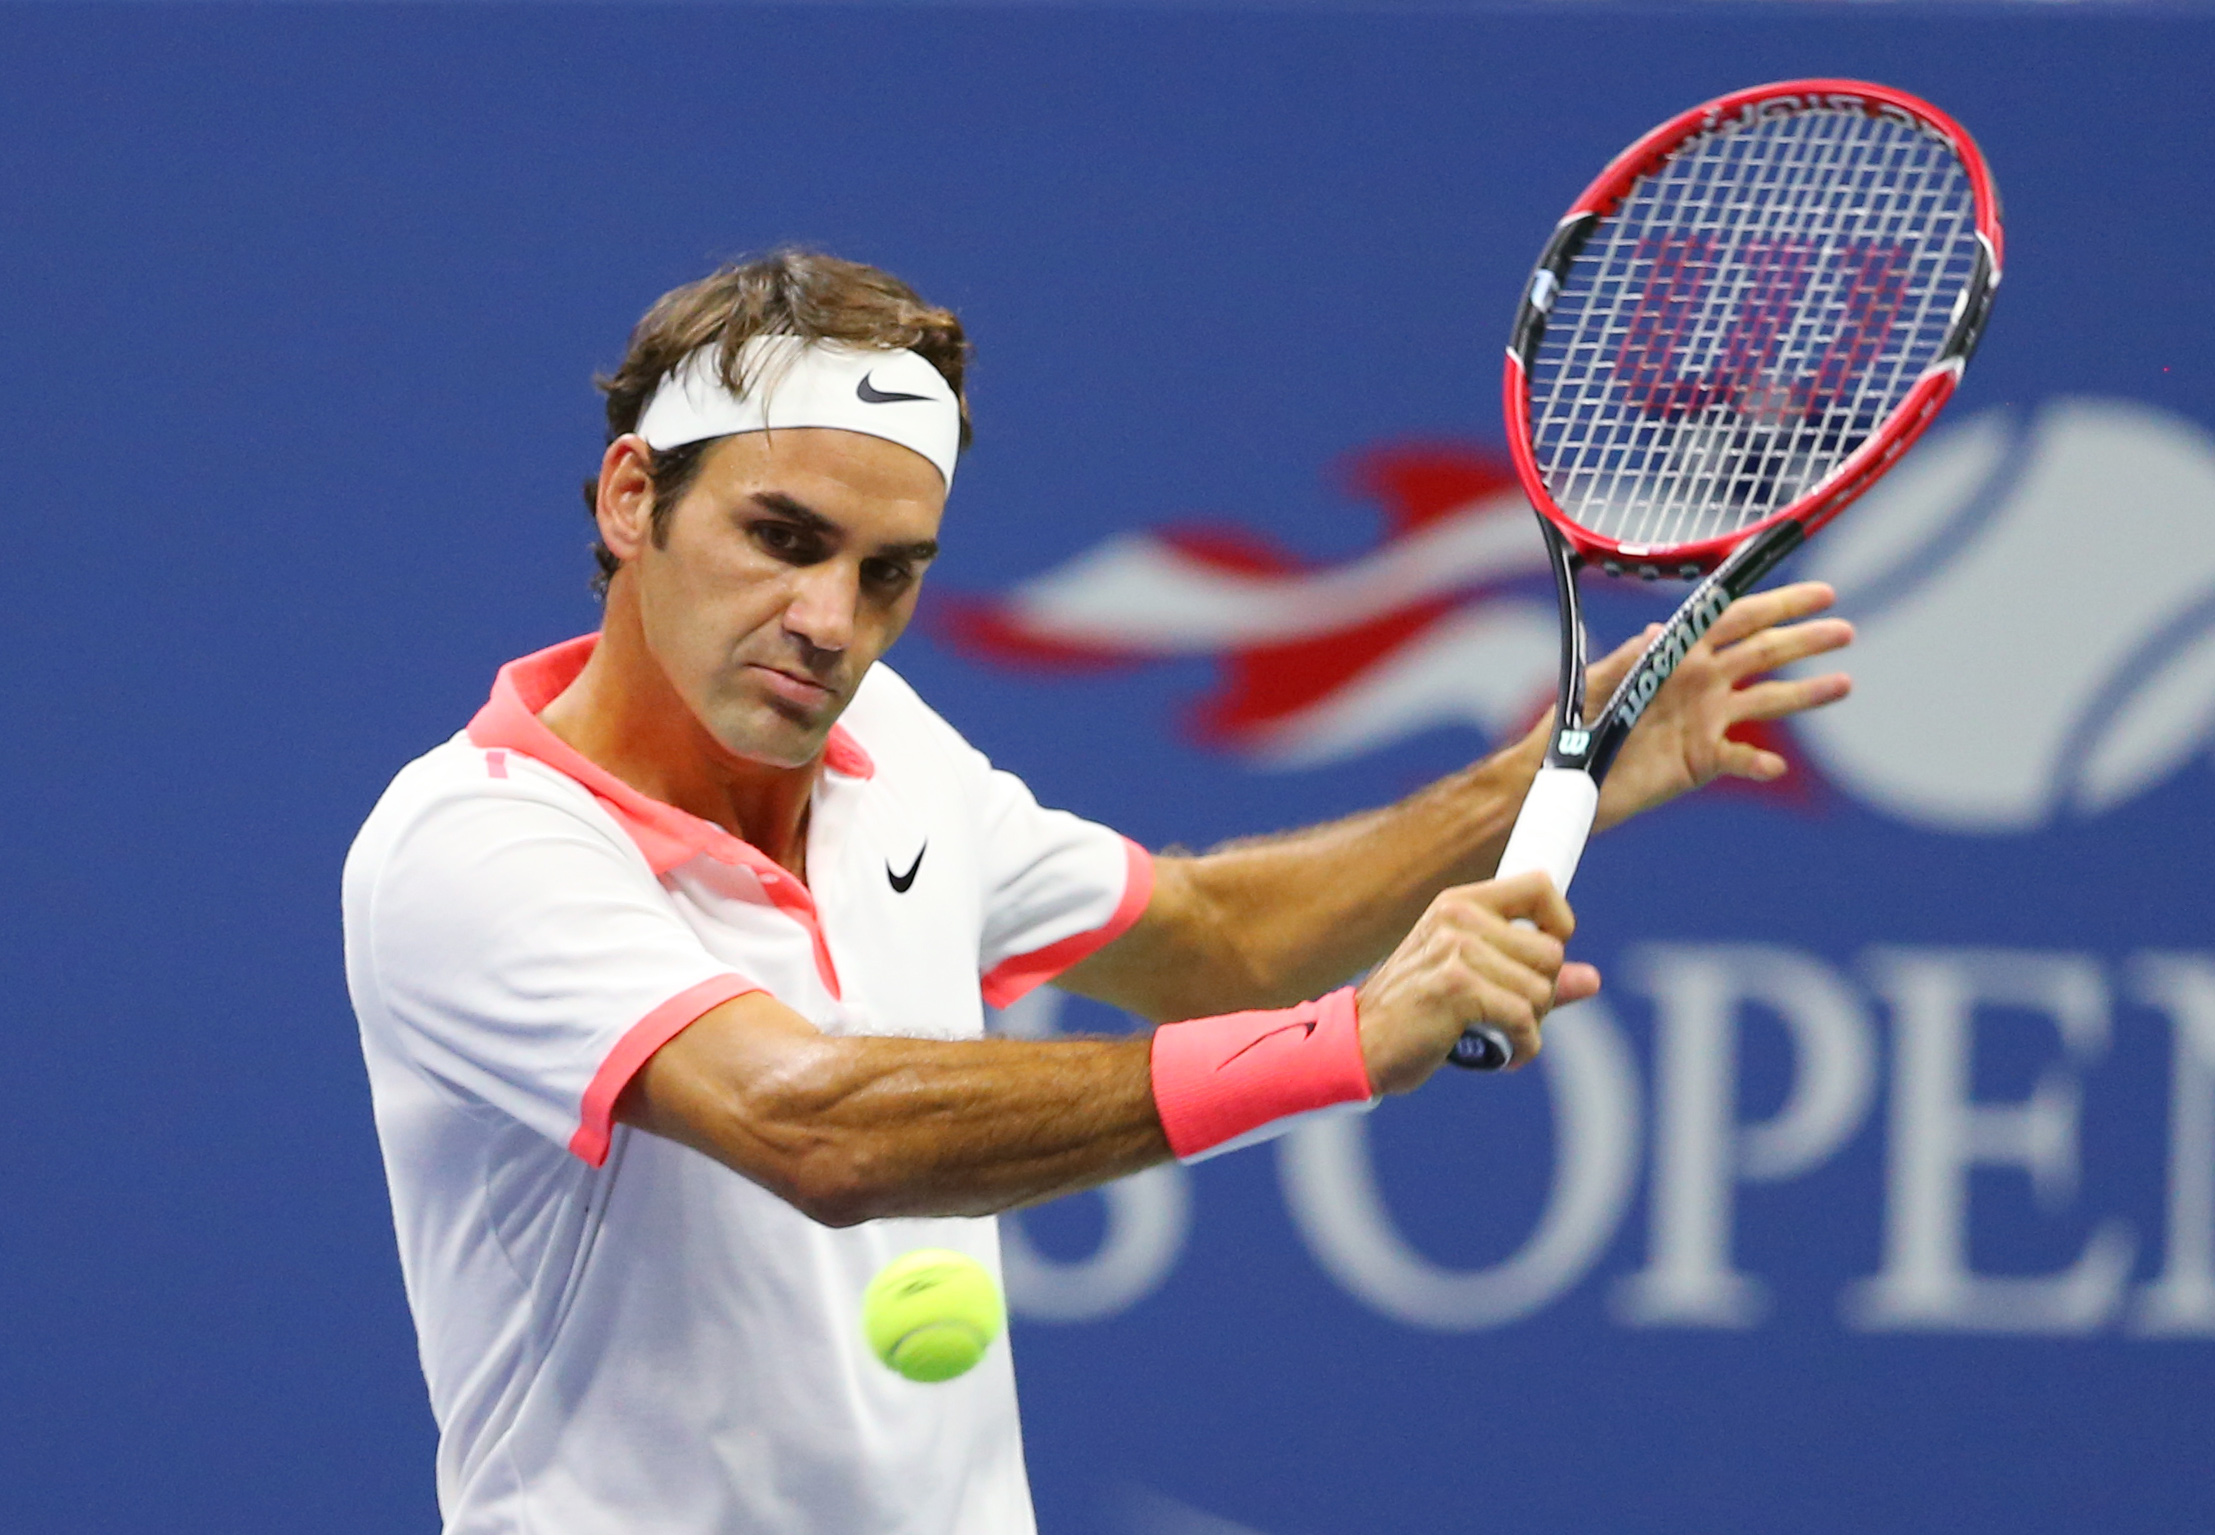 Sep 9, 2015; New York, NY, USA; Roger Federer of Switzerland returns a shot to Richard Gasquet of France on day ten of the 2015 U.S. Open tennis tournament at USTA Billie Jean King National Tennis Center. Mandatory Credit: Jerry Lai-USA TODAY Sports